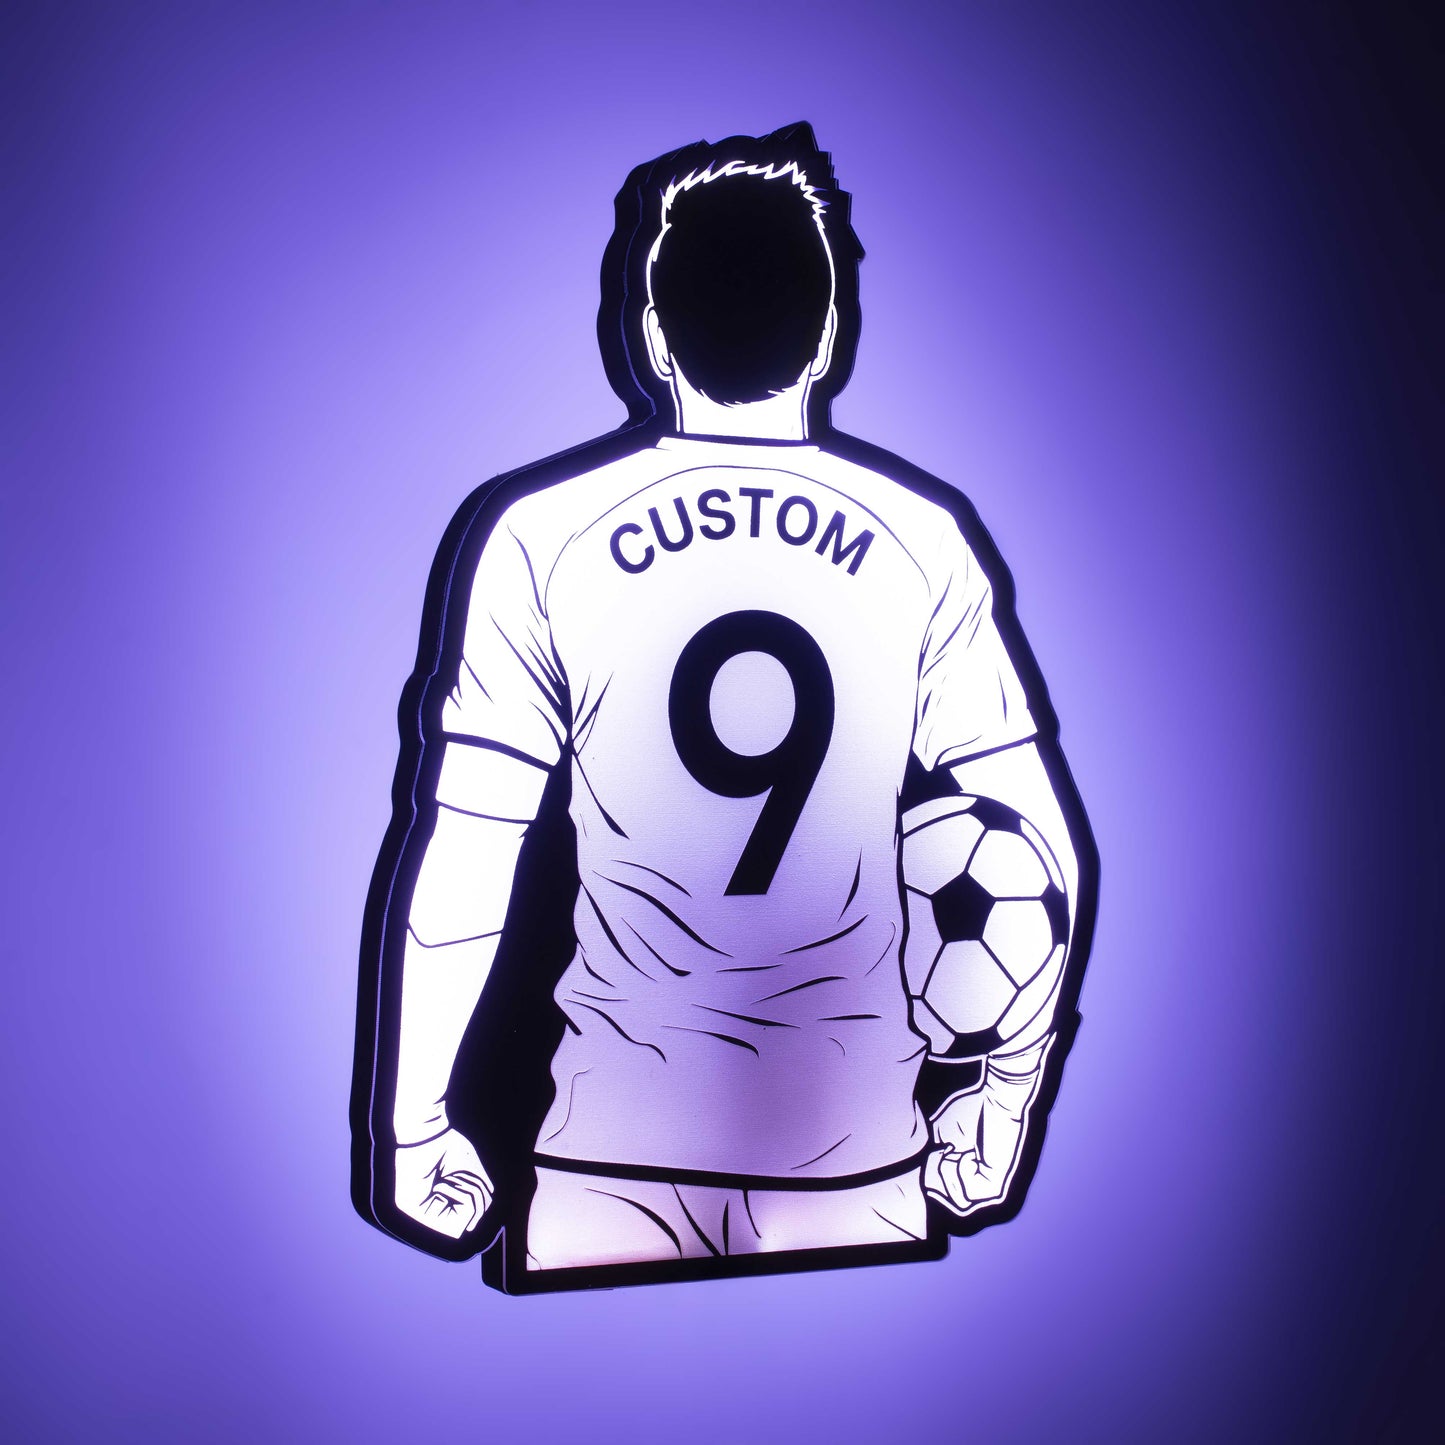 a 3d wall mounted acrylic light, back-lit by  multi-color led lights, featuring a cartoon style illustration of soccer player holding a soccer ball under his arm, view from behind showing the back of the soccer players jersey. The text and number on the back of the jersey can be personalised.